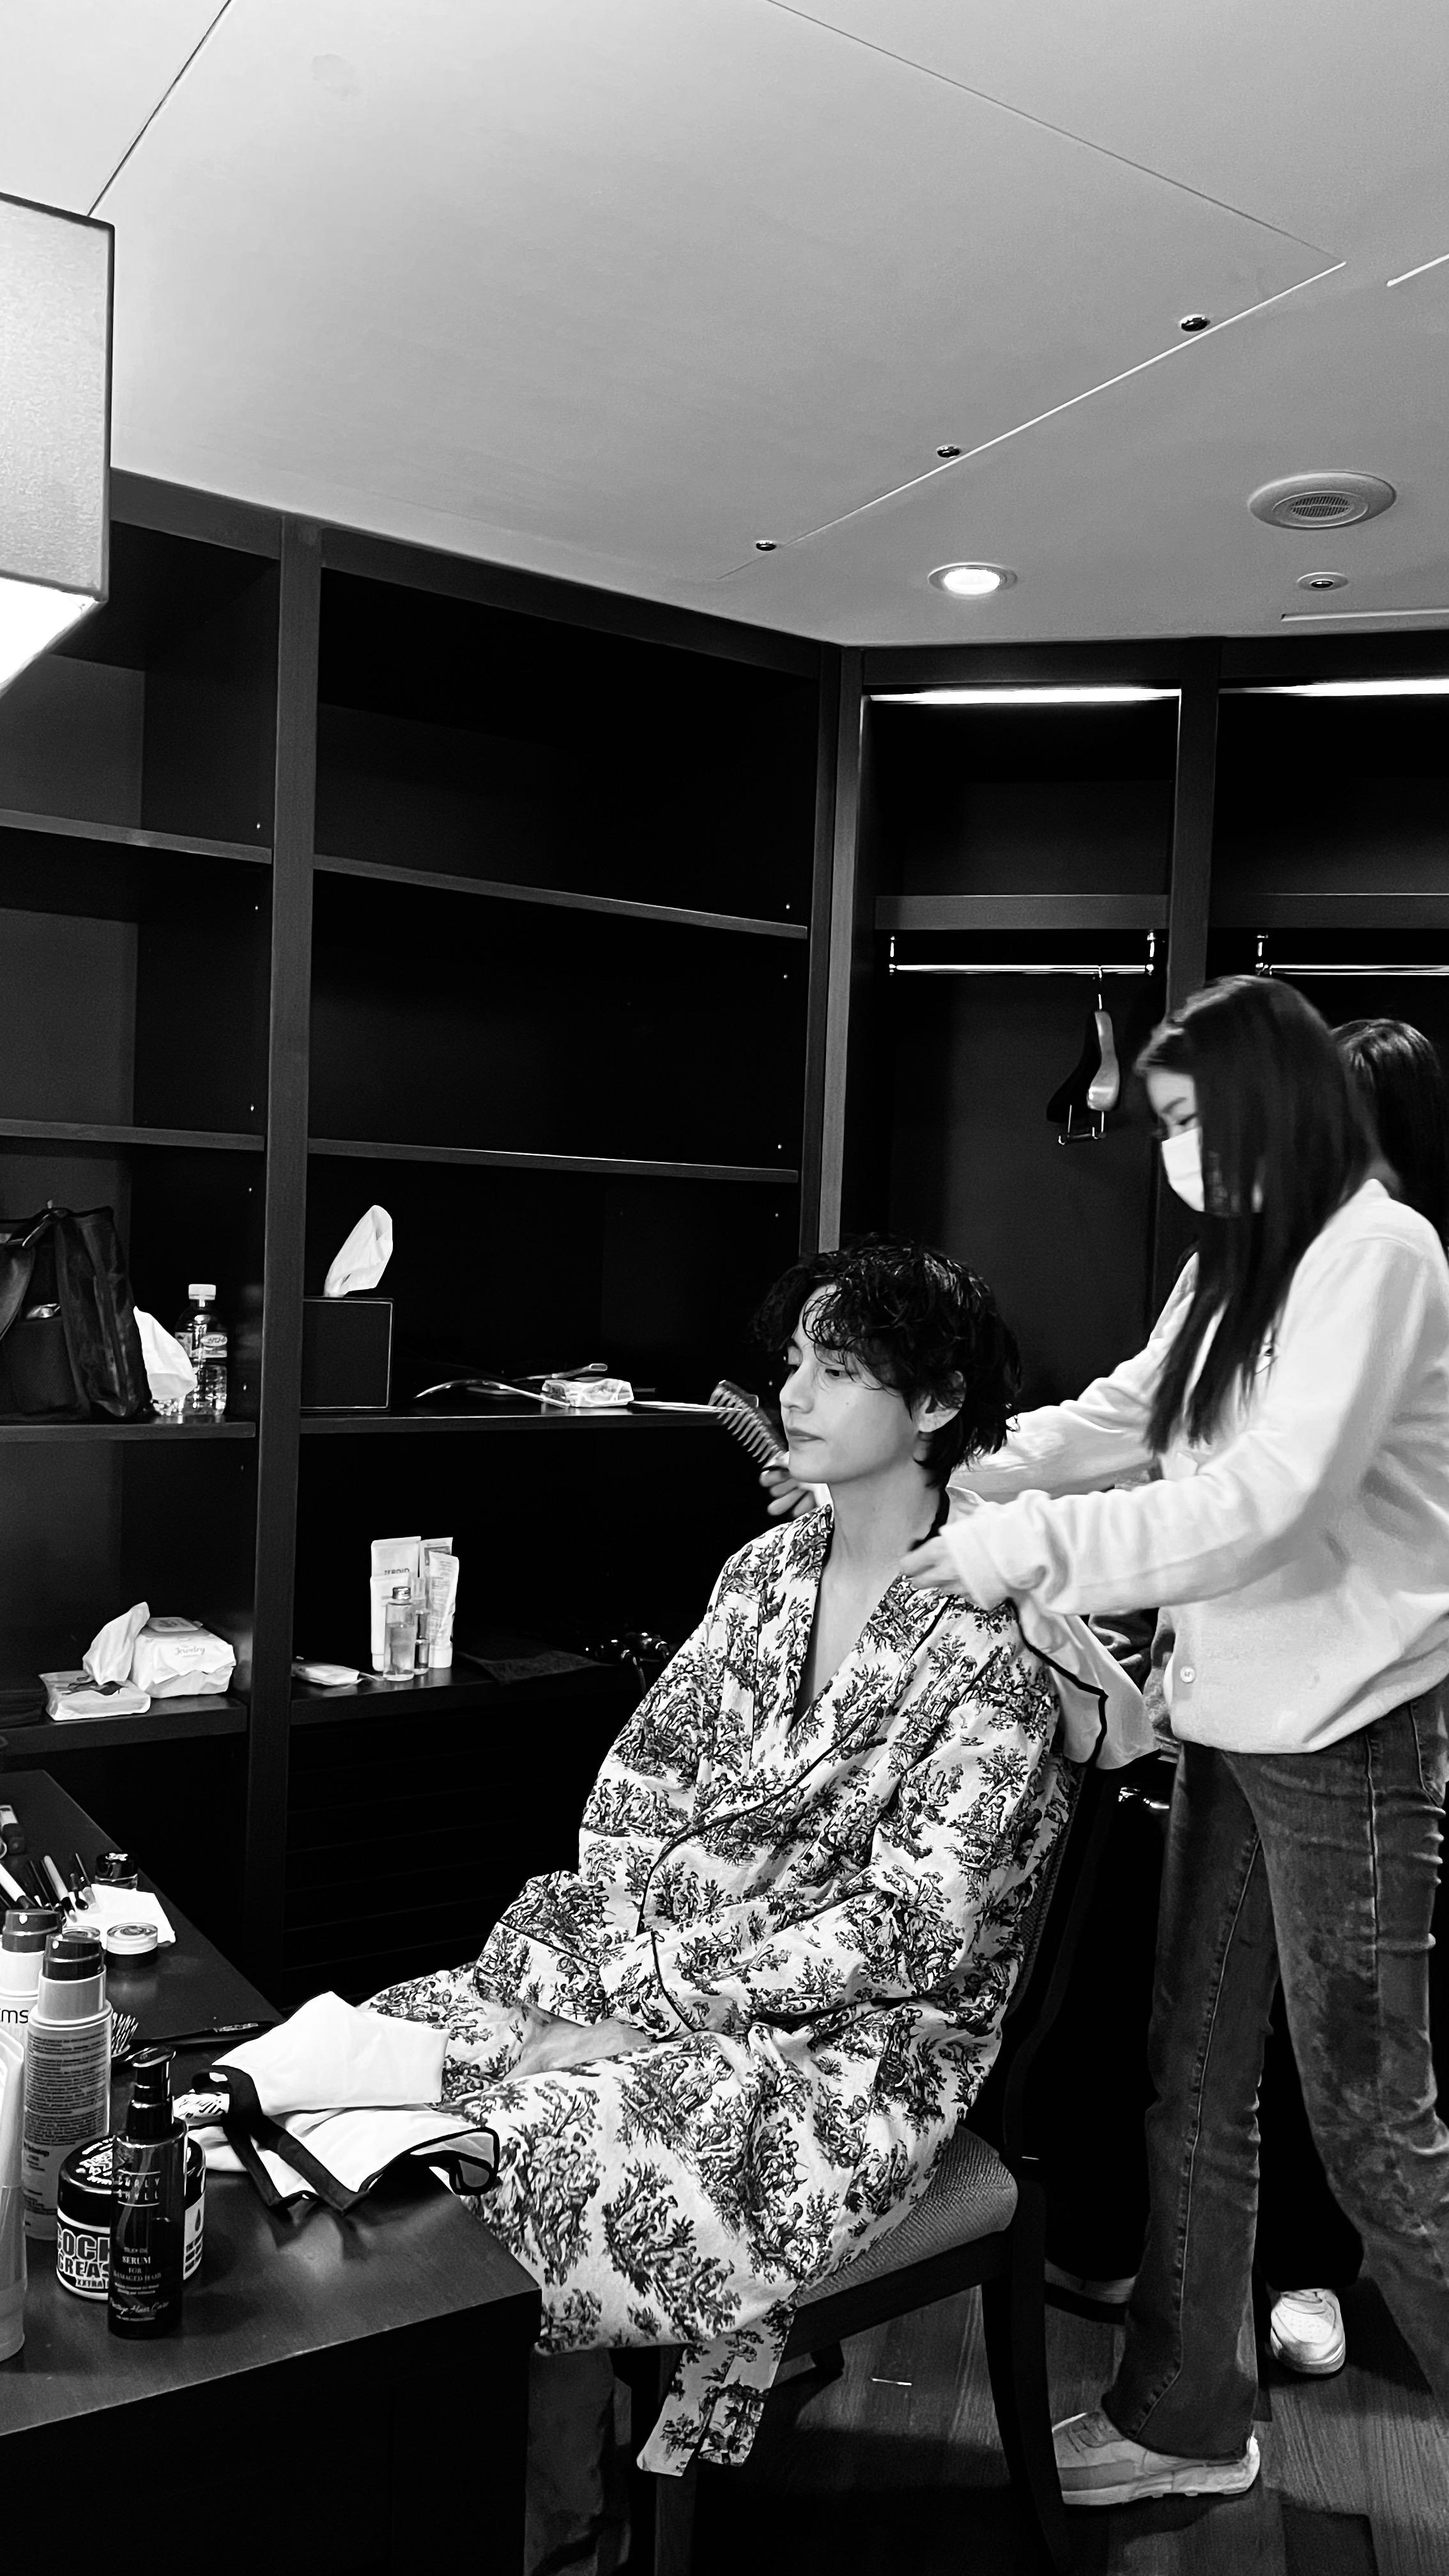 The 'World's Most Handsome Man' gets his hair and makeup done